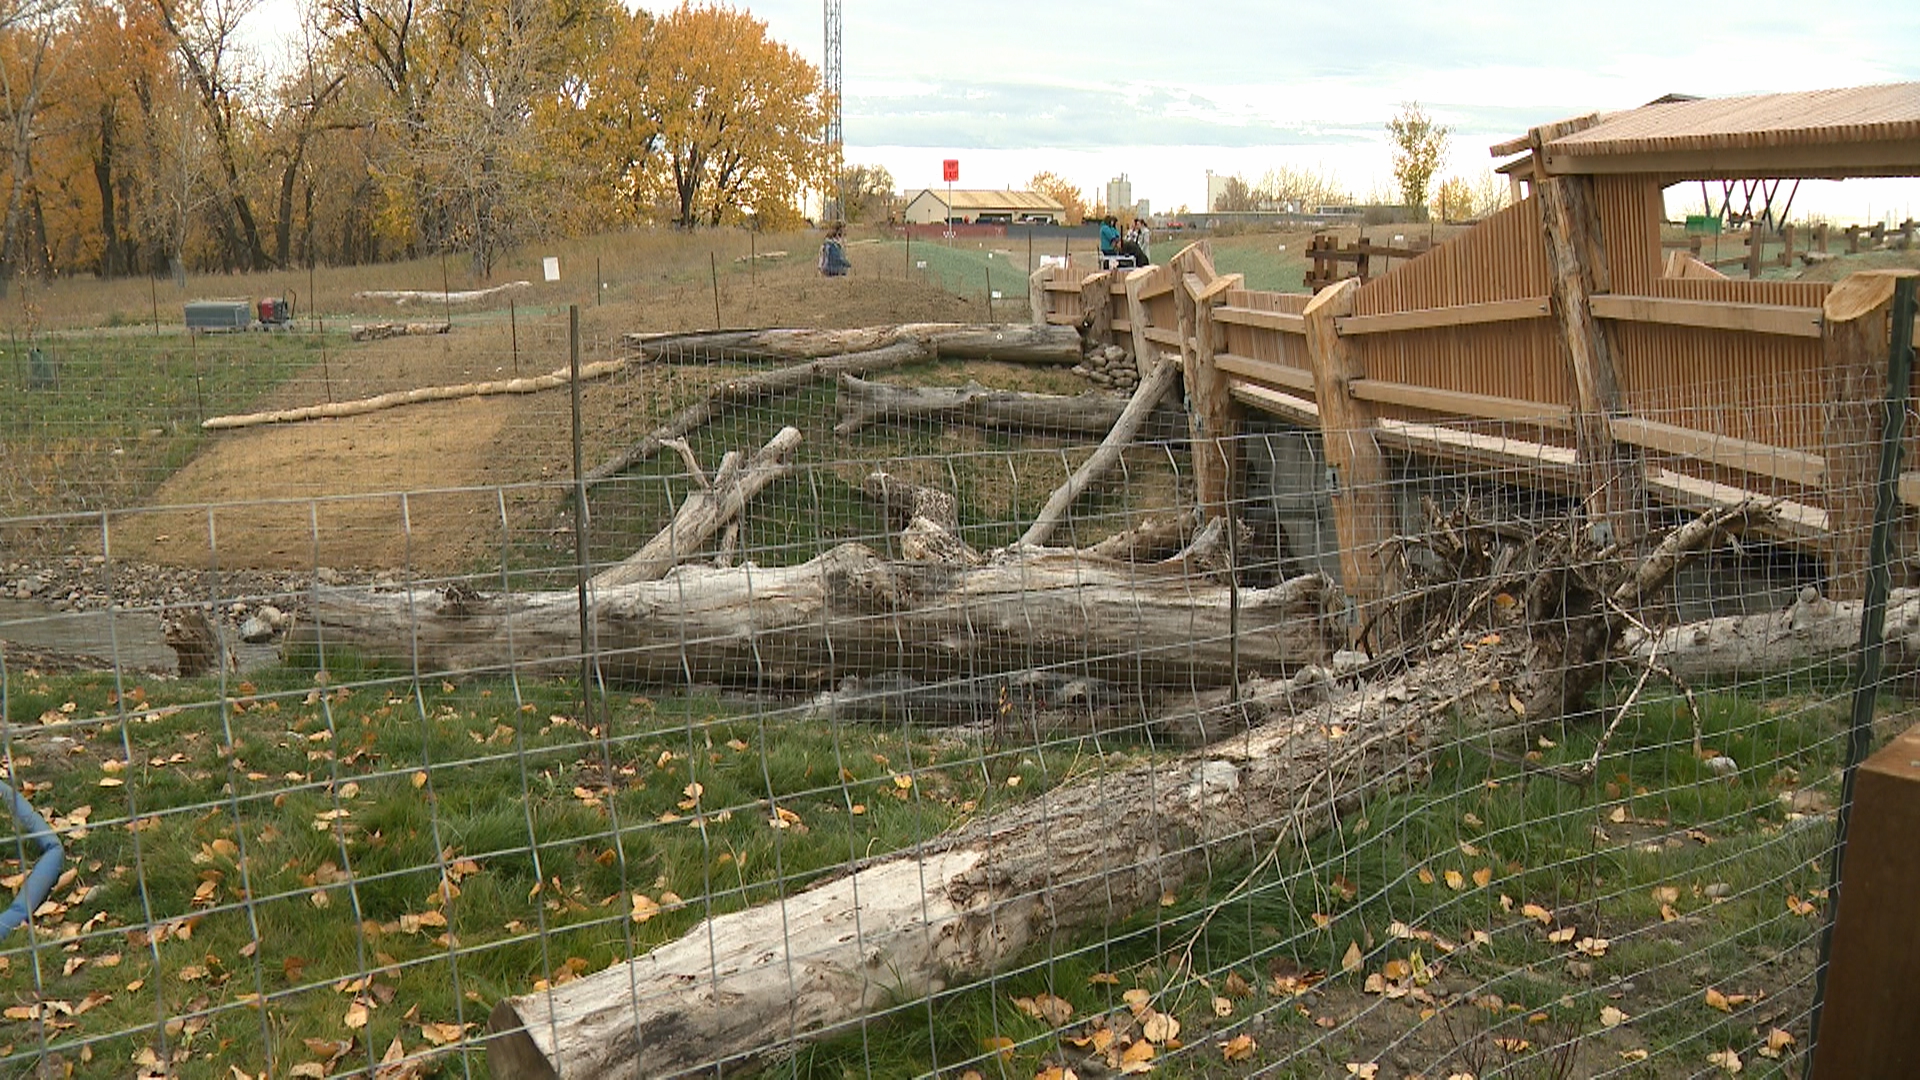 Calgary’s Inglewood Bird Sanctuary reopens with new channel, ‘Log Jam’